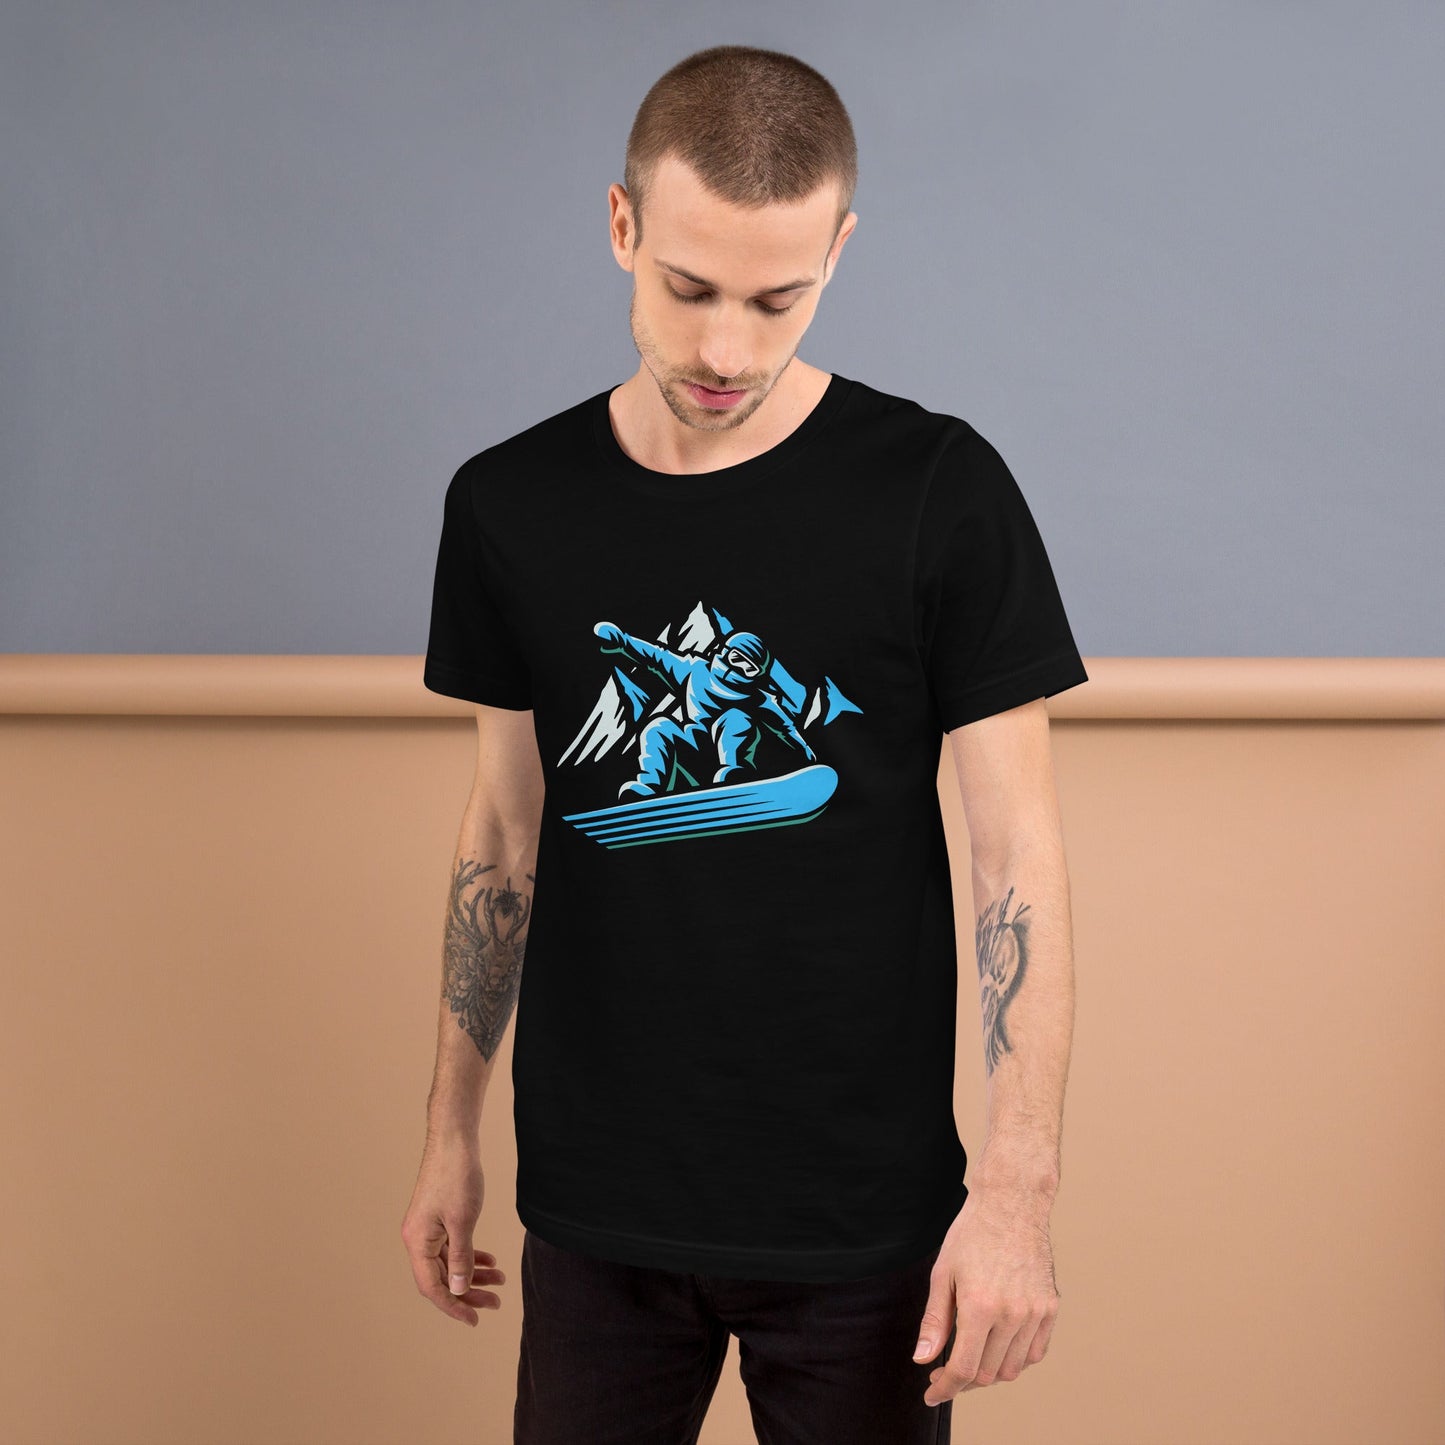 Shop Snowboarding Graphic Tees